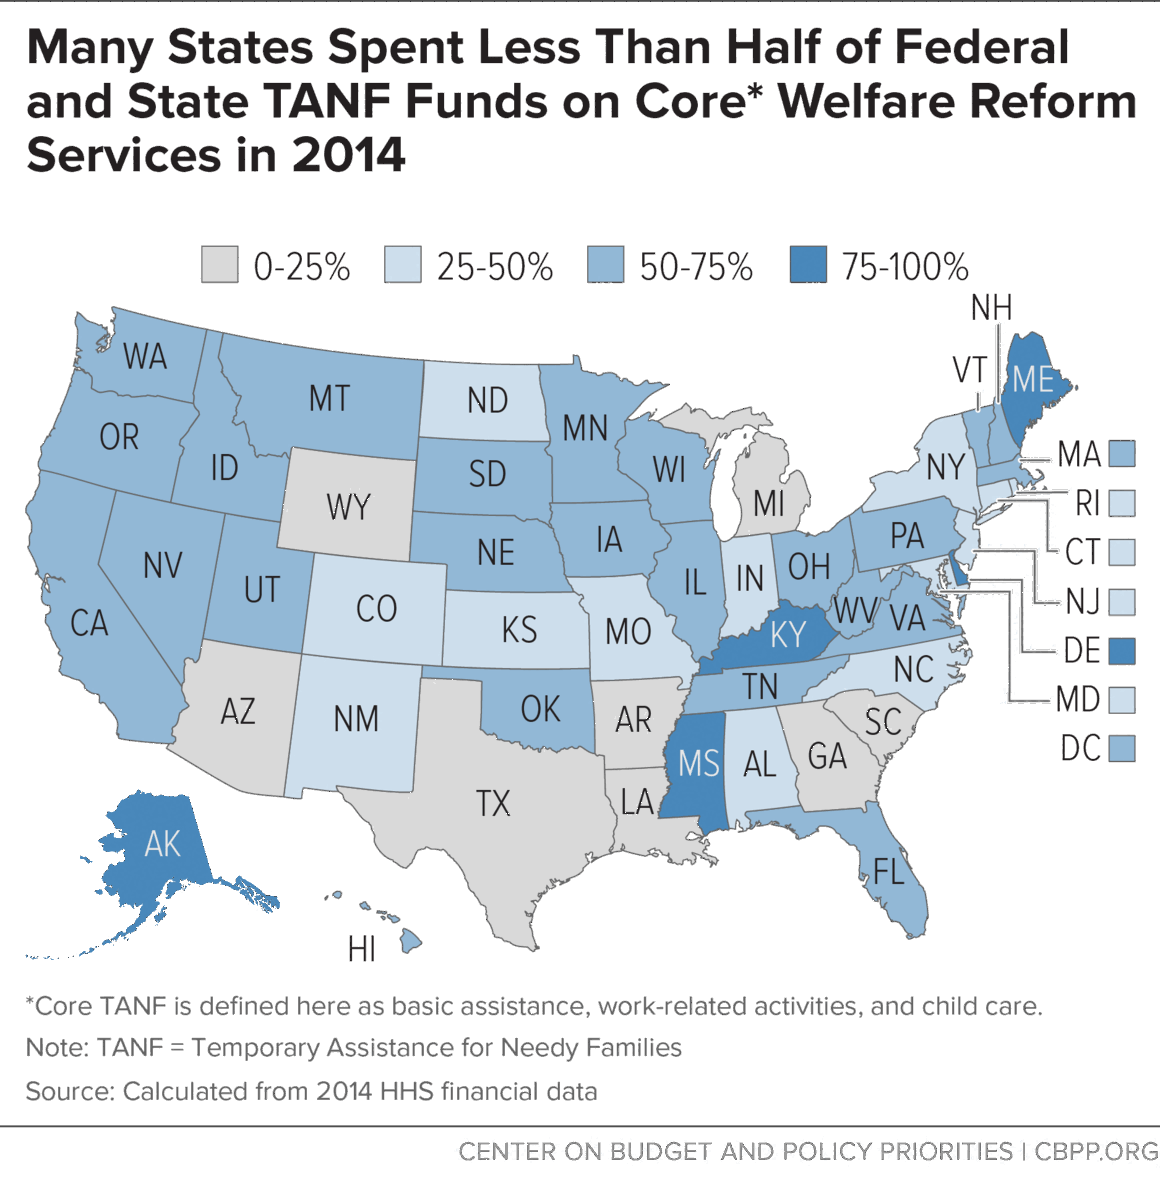 Many States Less Than Half on Core Welfare Reform 2014